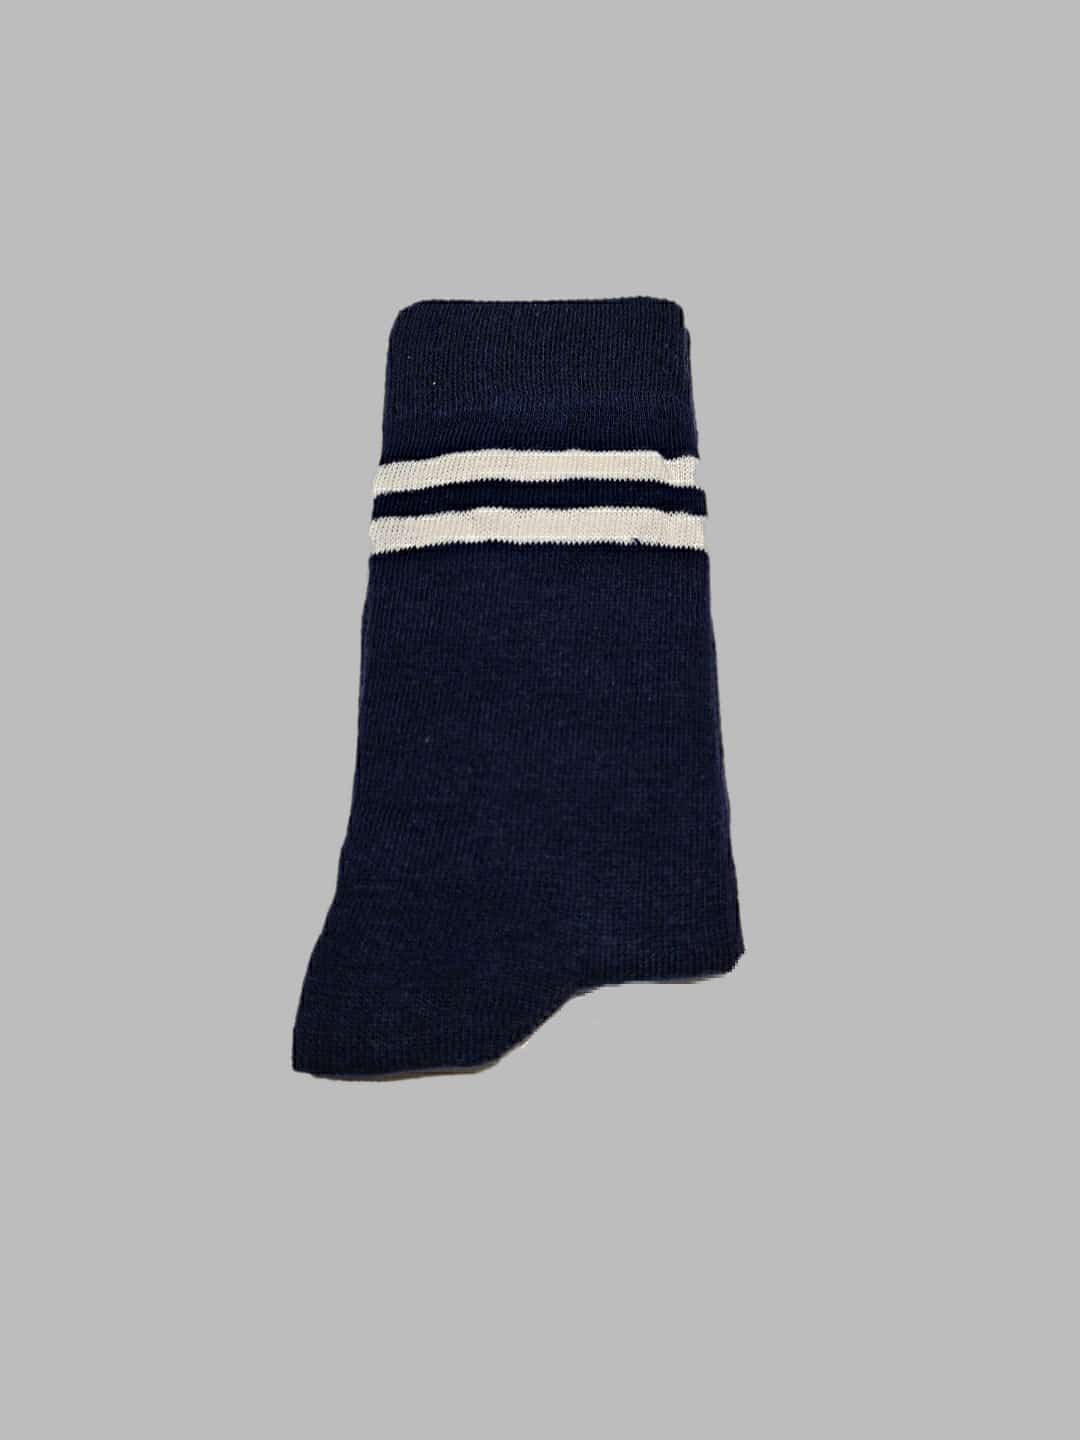 Navy Blue With White Double Stripe